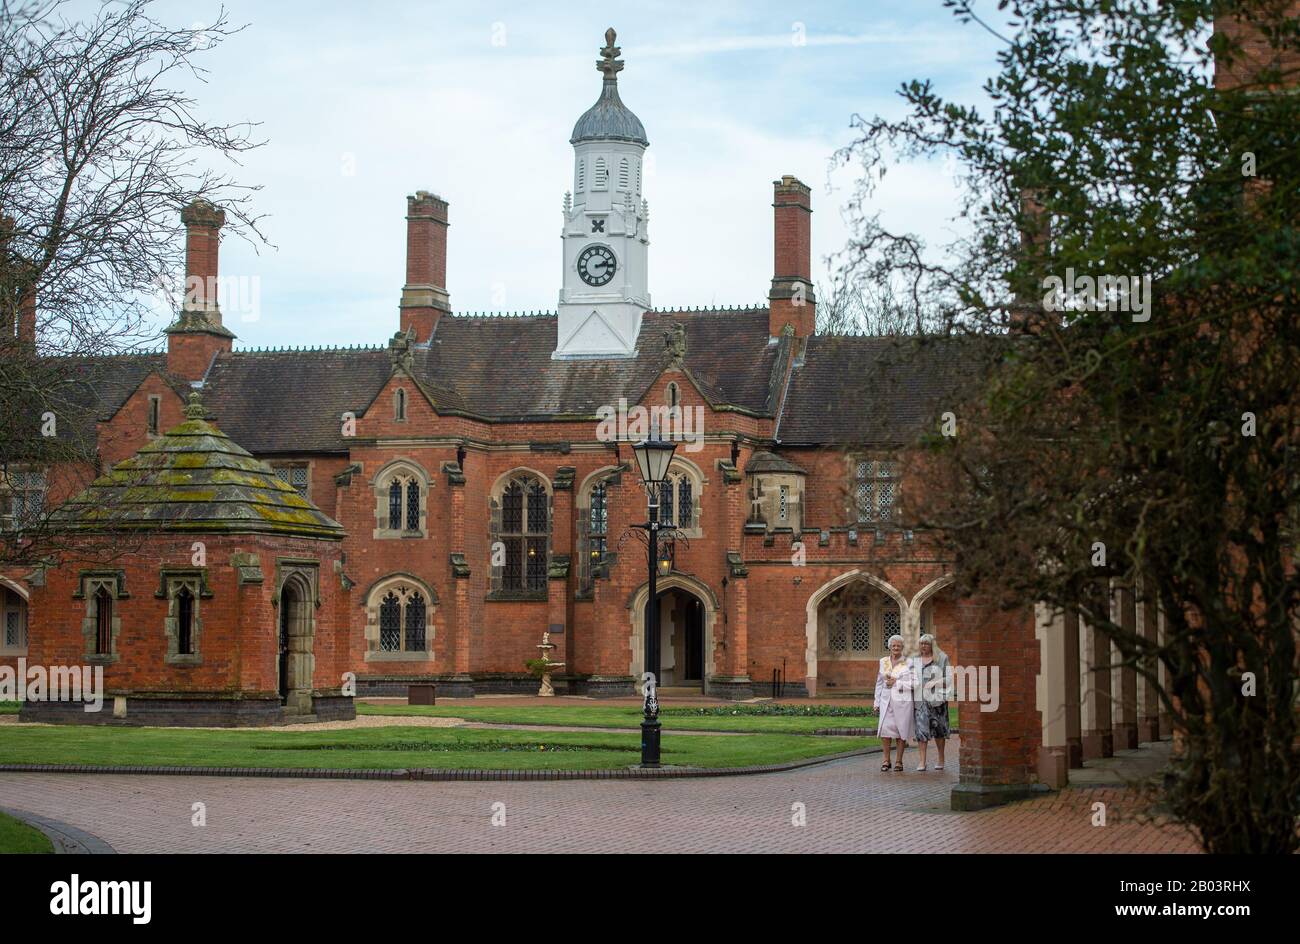 General view of the Nicholas Chamberlaine Almshouses in Bedworth ahead of a visit by The Prince of Wales during a tour of Warwickshire and the West Midlands. Stock Photo